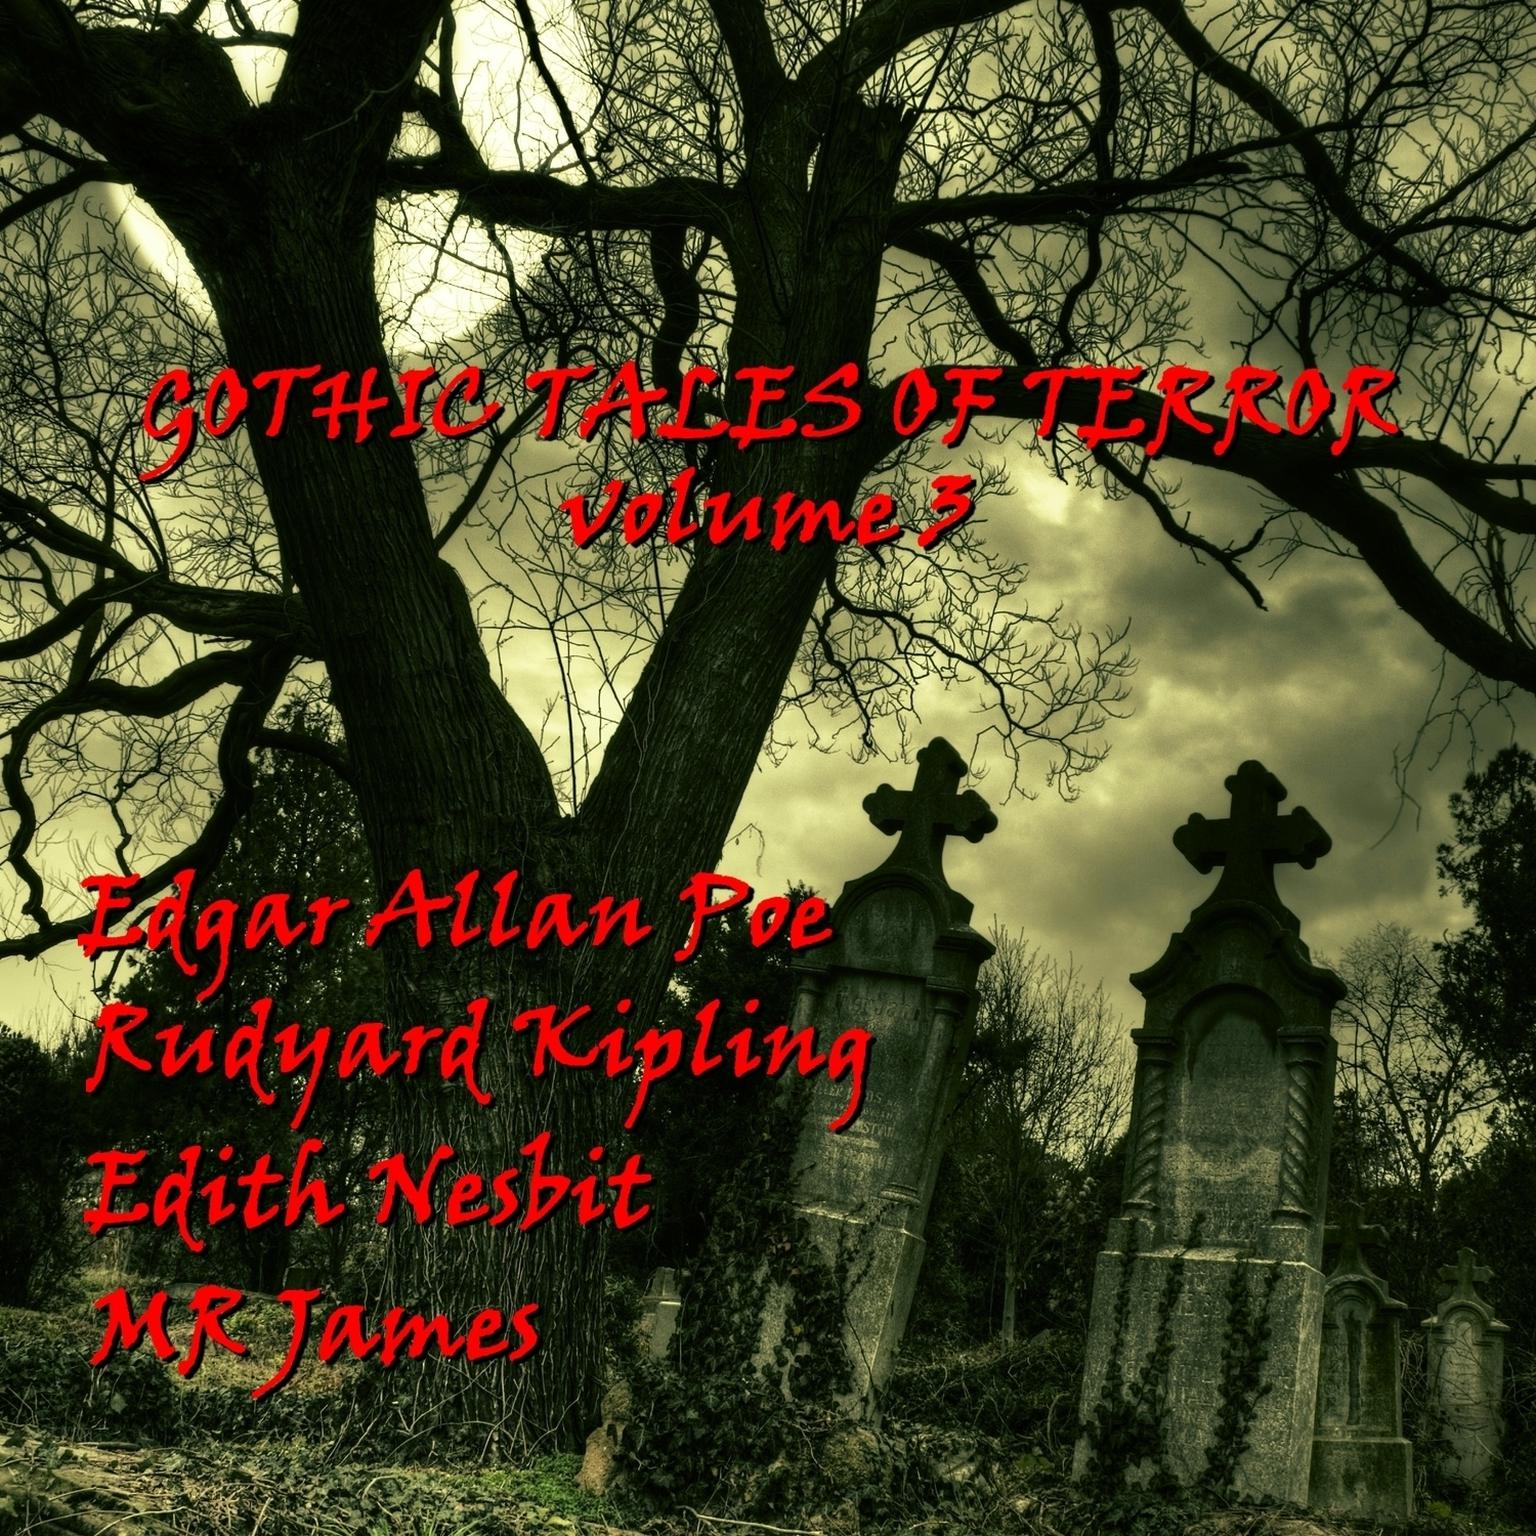 Gothic Tales of Terror, Vol. 3 (Abridged) Audiobook, by various authors